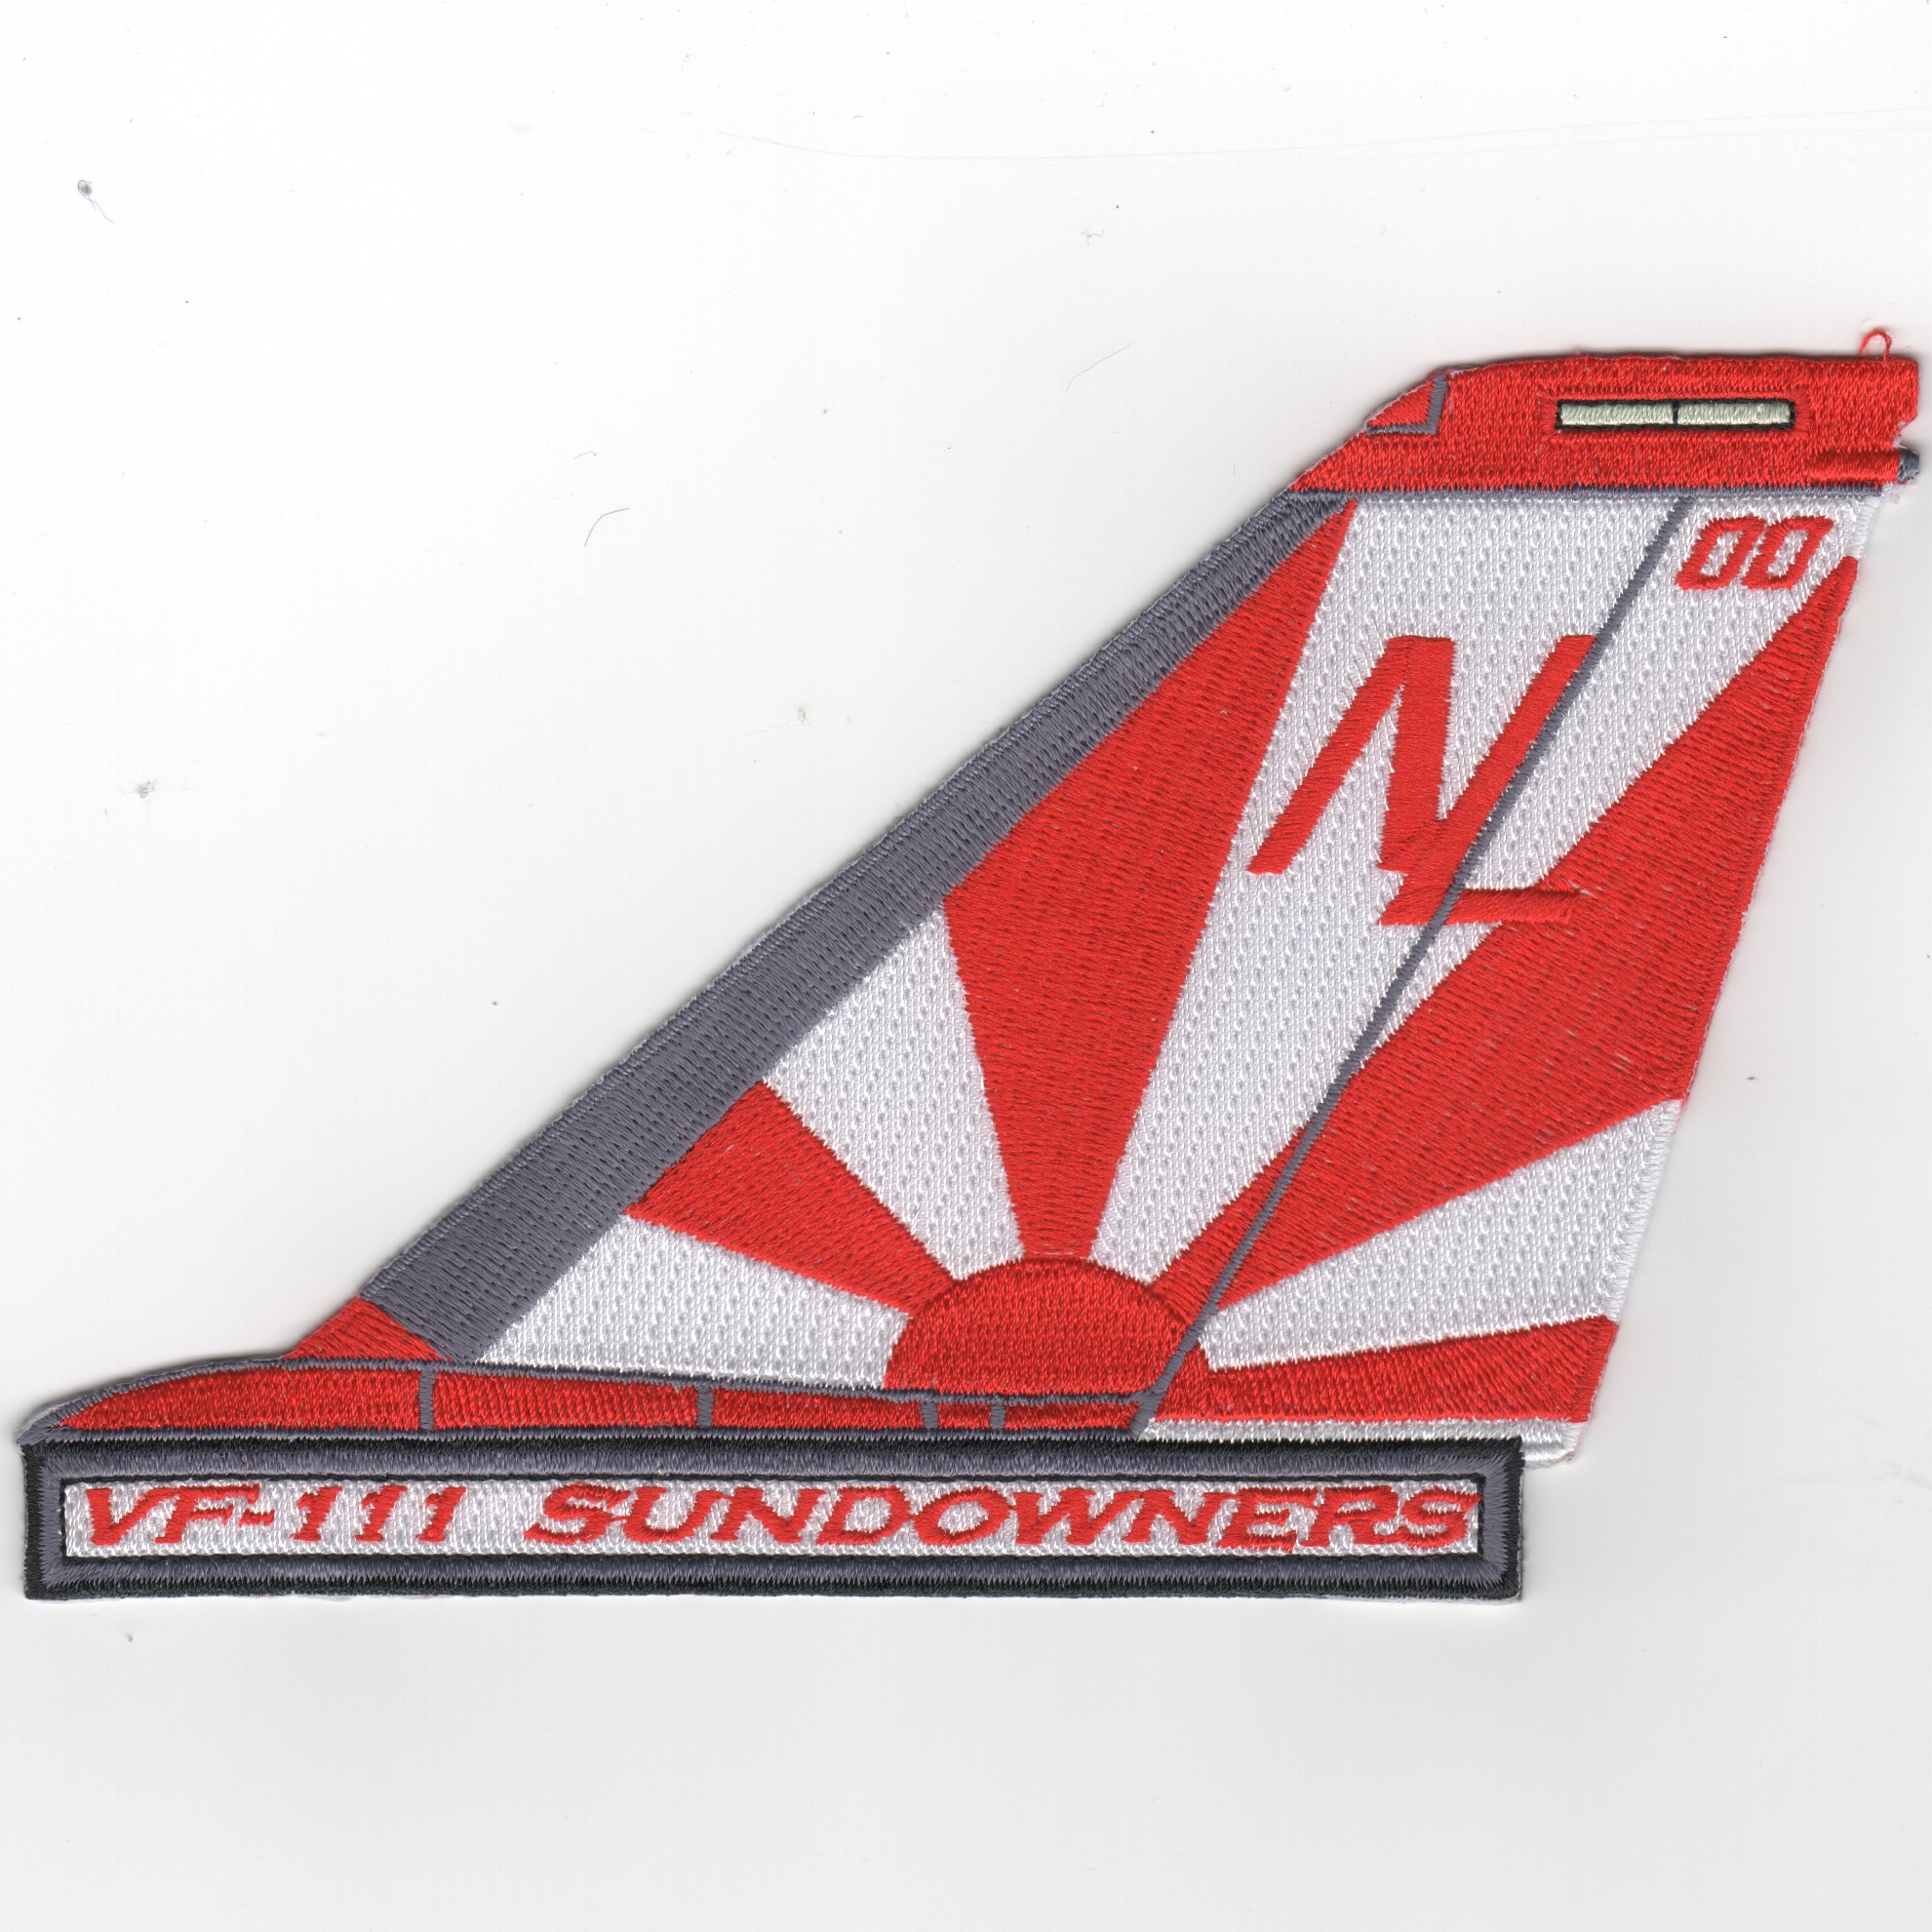 VF-111 F-14 Tailfin (Text/Red-White)